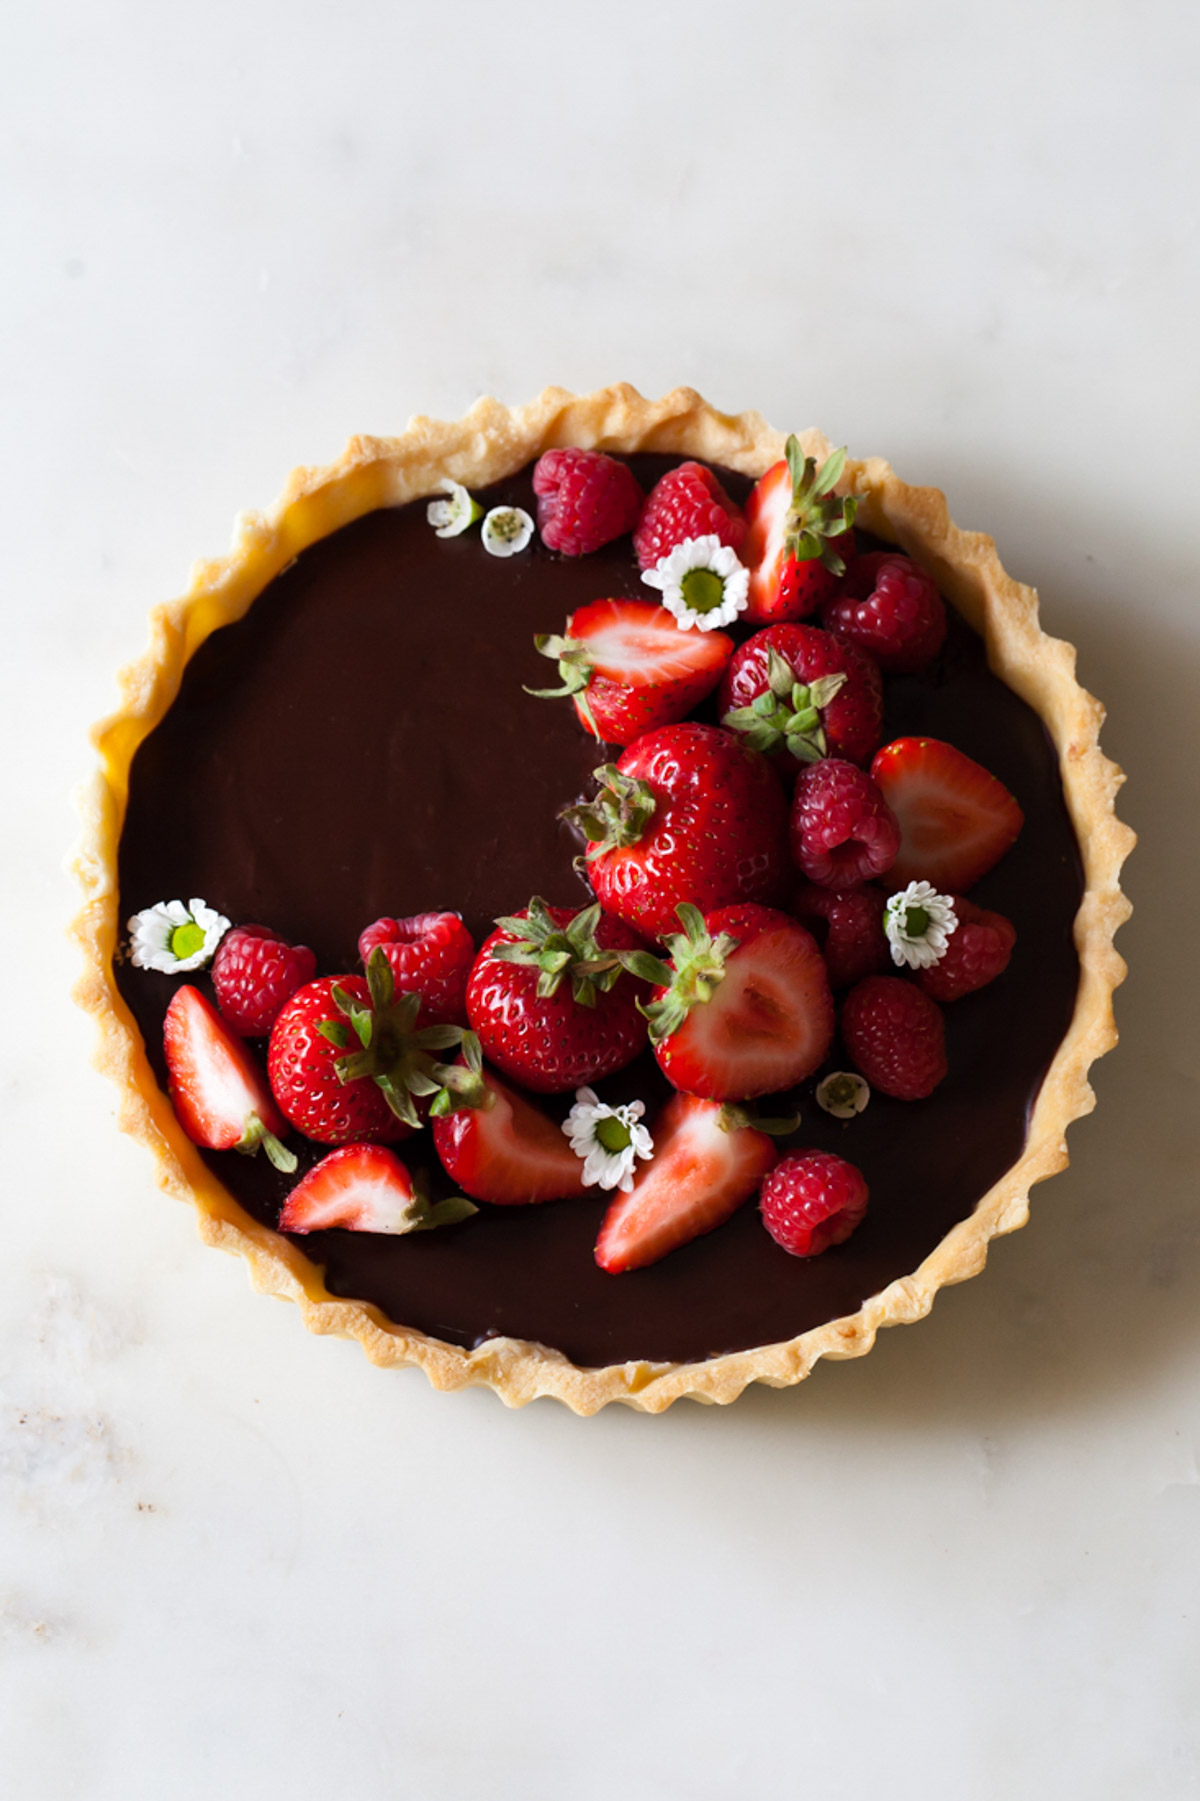 An overhead image of a classic chocolate ganache tart with fresh raspberries and strawberries on top